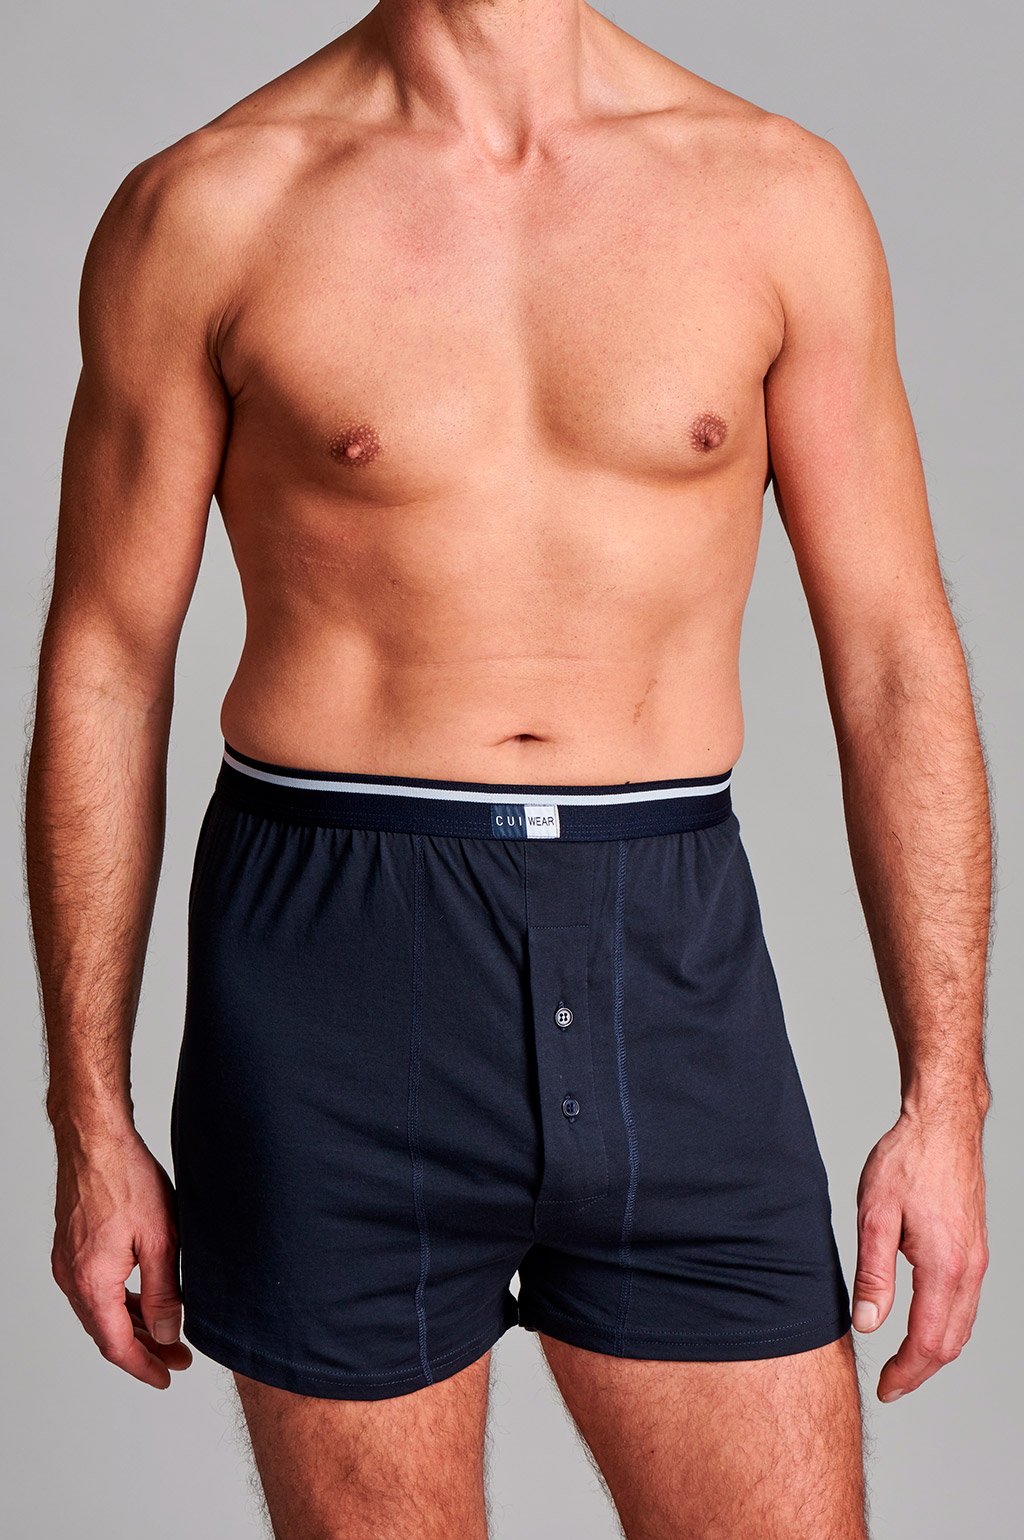 CUI Mens Ostomy High Waist Cotton Boxer - 1 each, LARGE, NAVY - TWIN